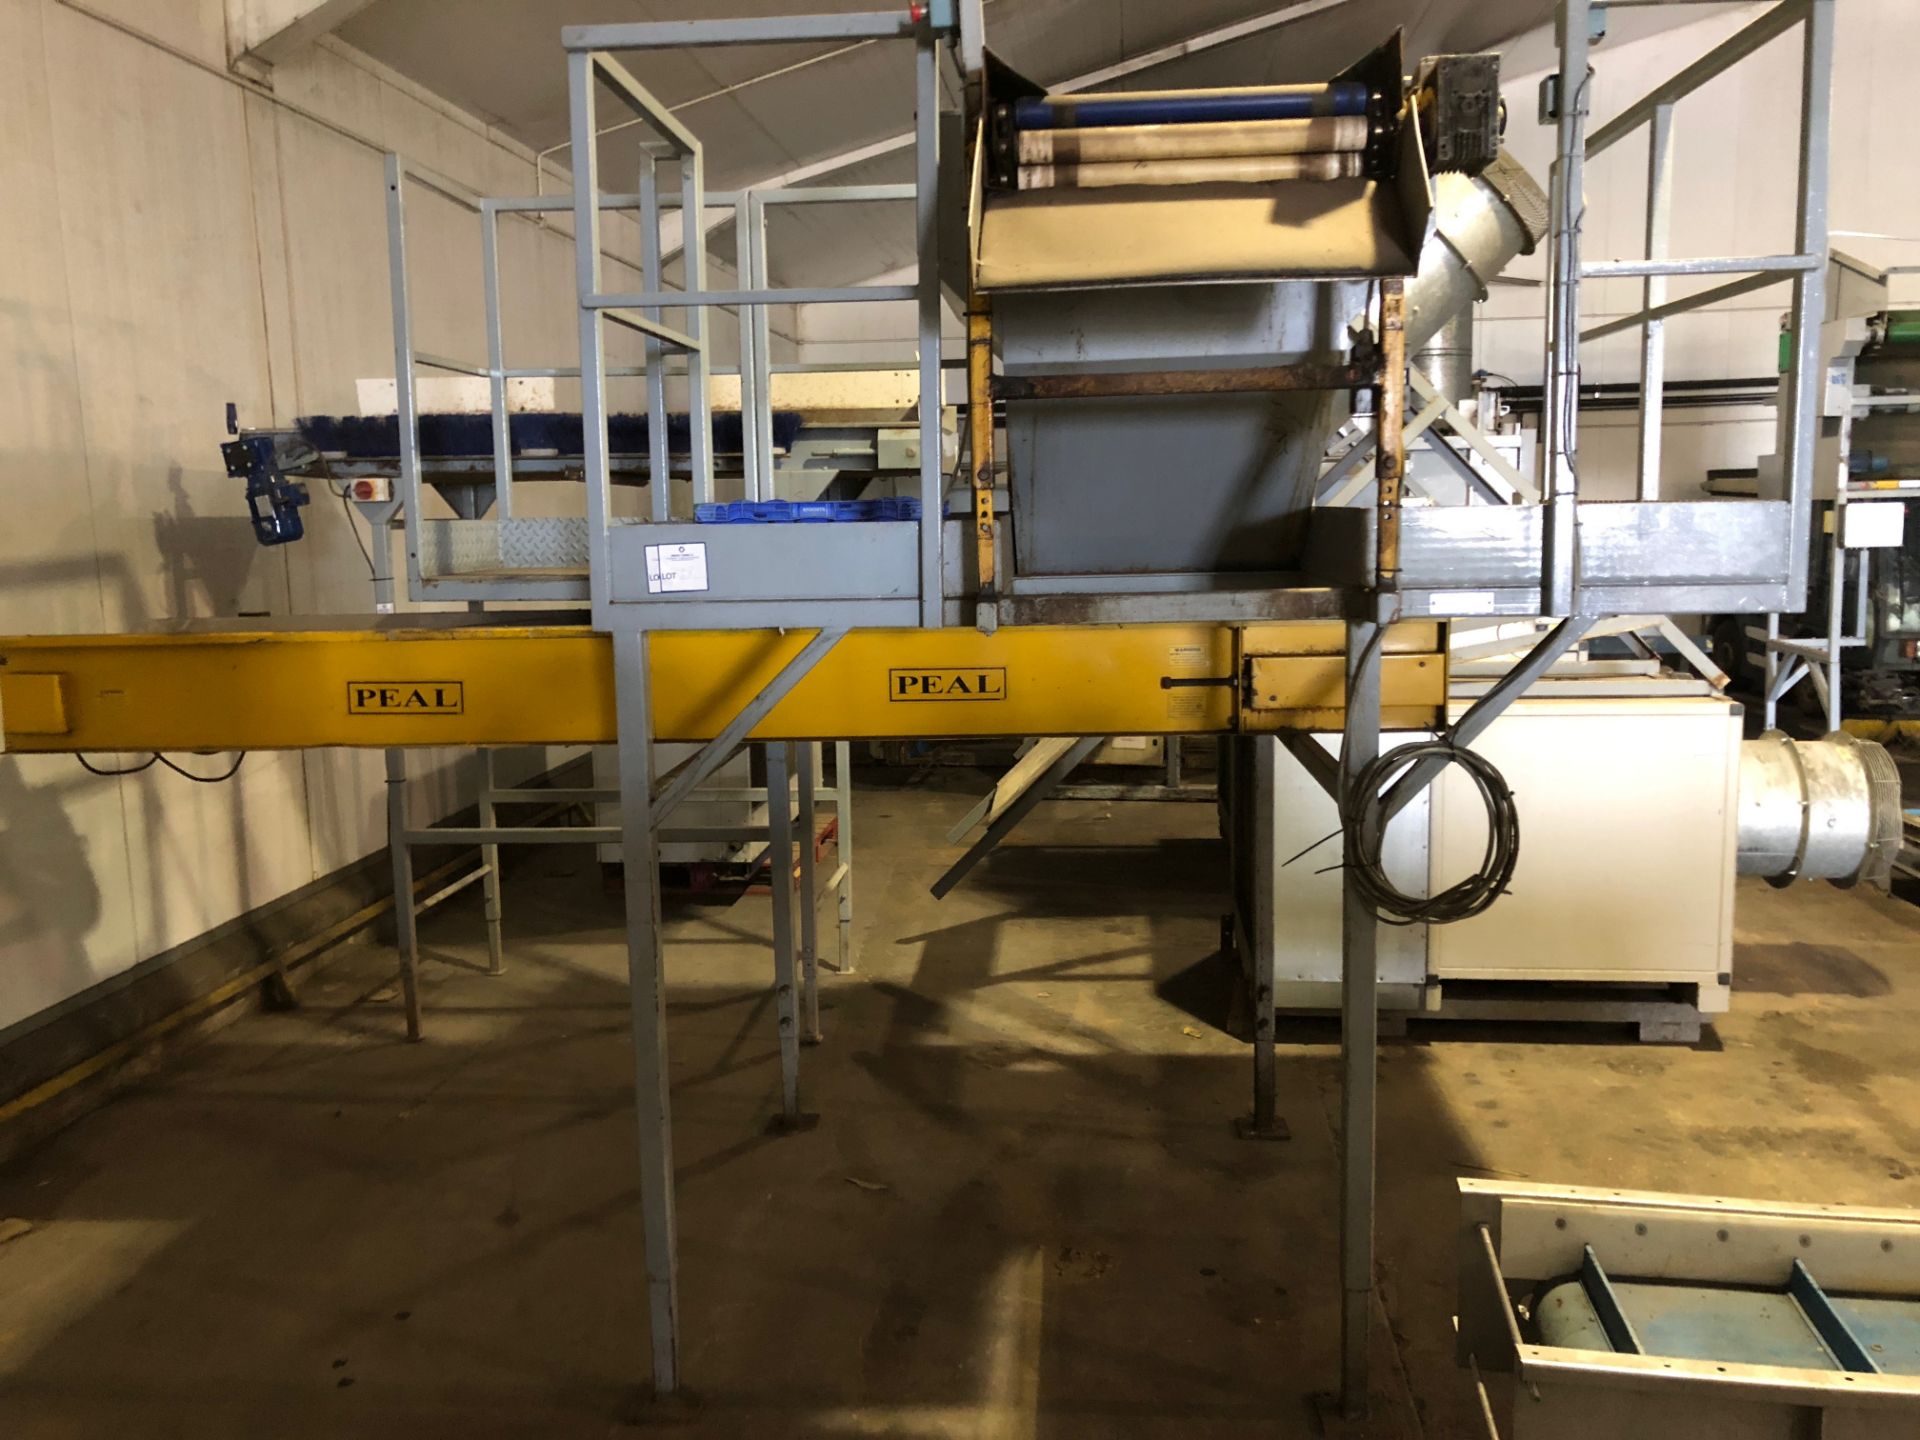 Peal inspection table with reject belt